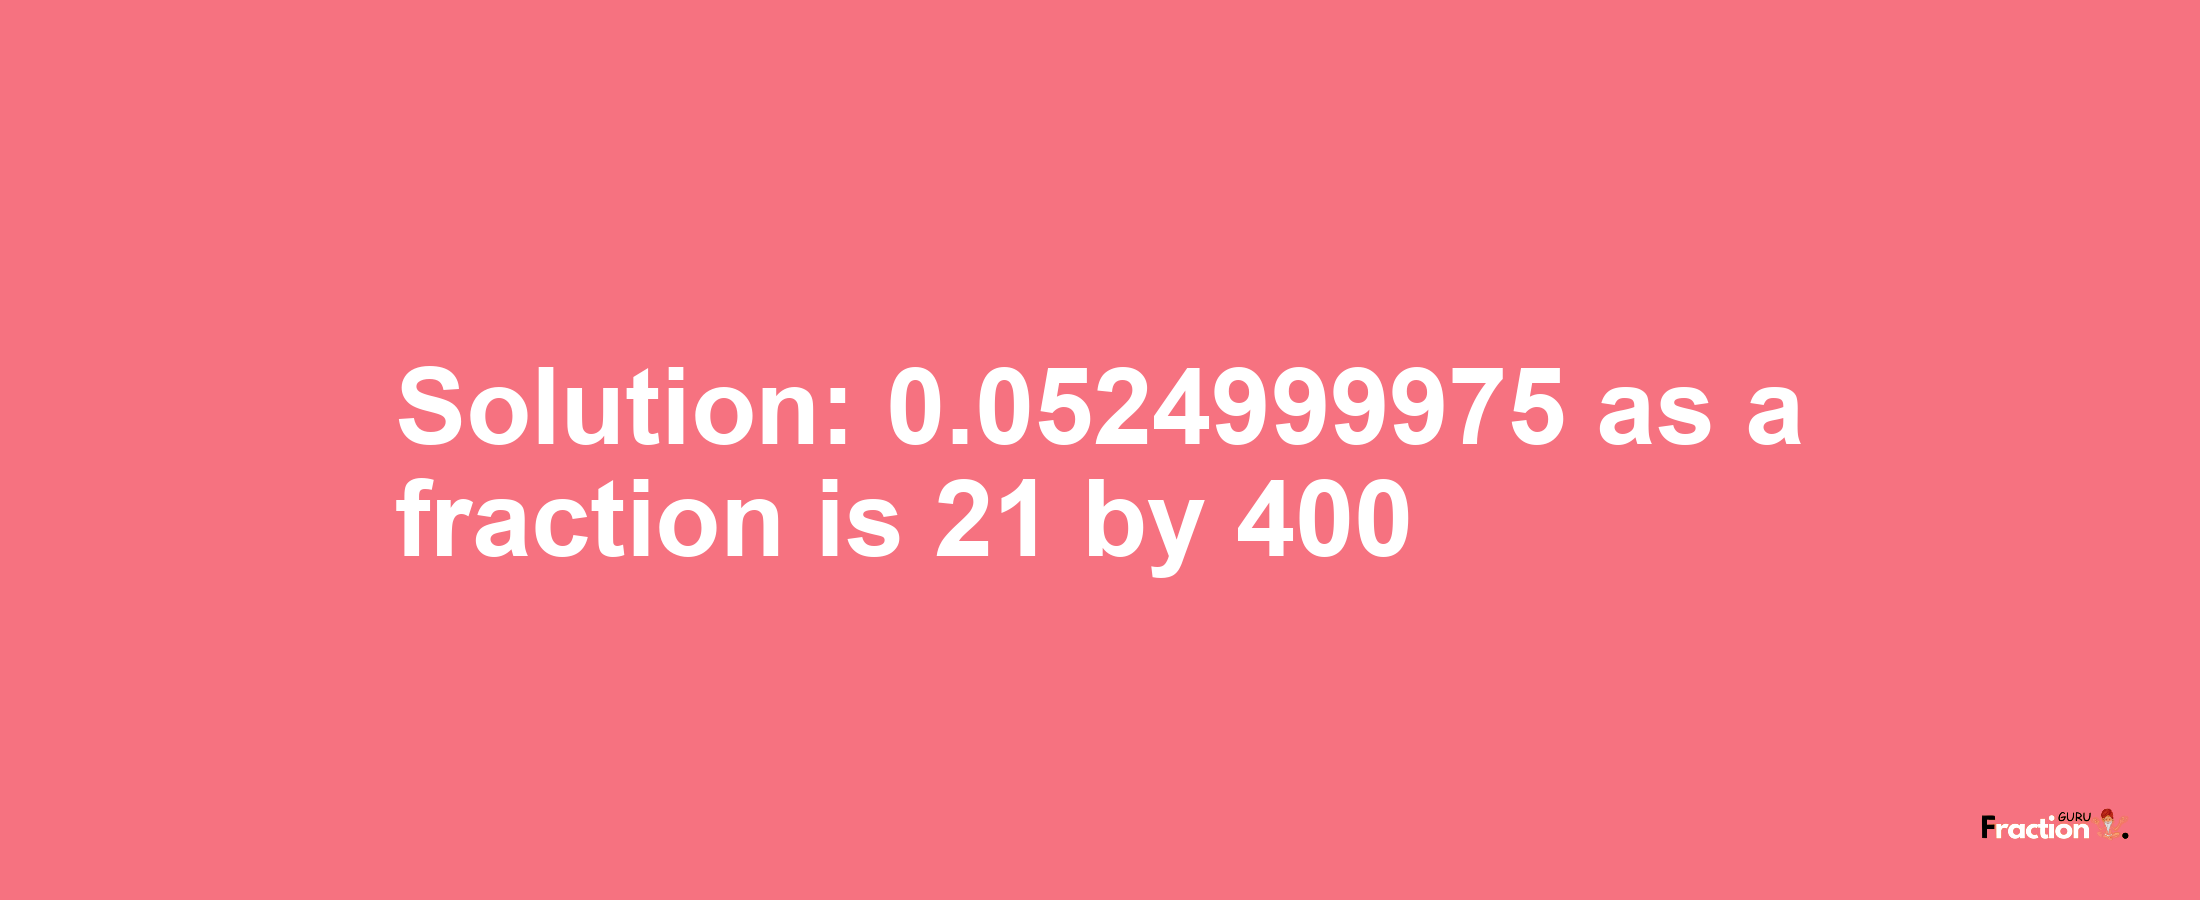 Solution:0.0524999975 as a fraction is 21/400